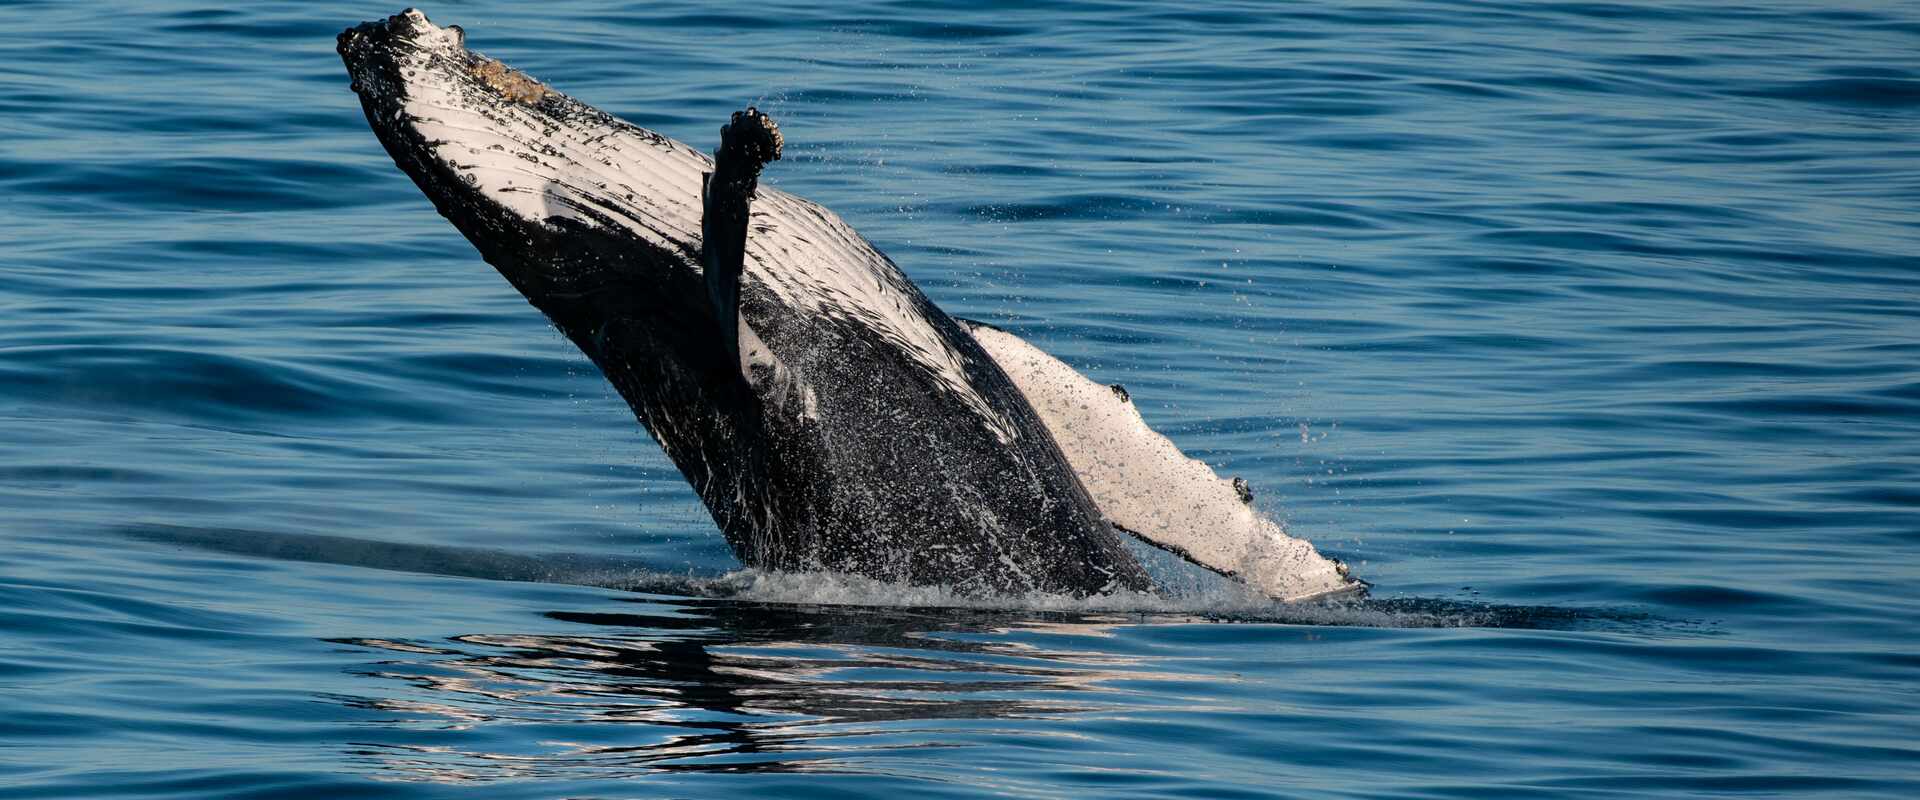 Whale breaching out of water in Adele Island, Kimberley